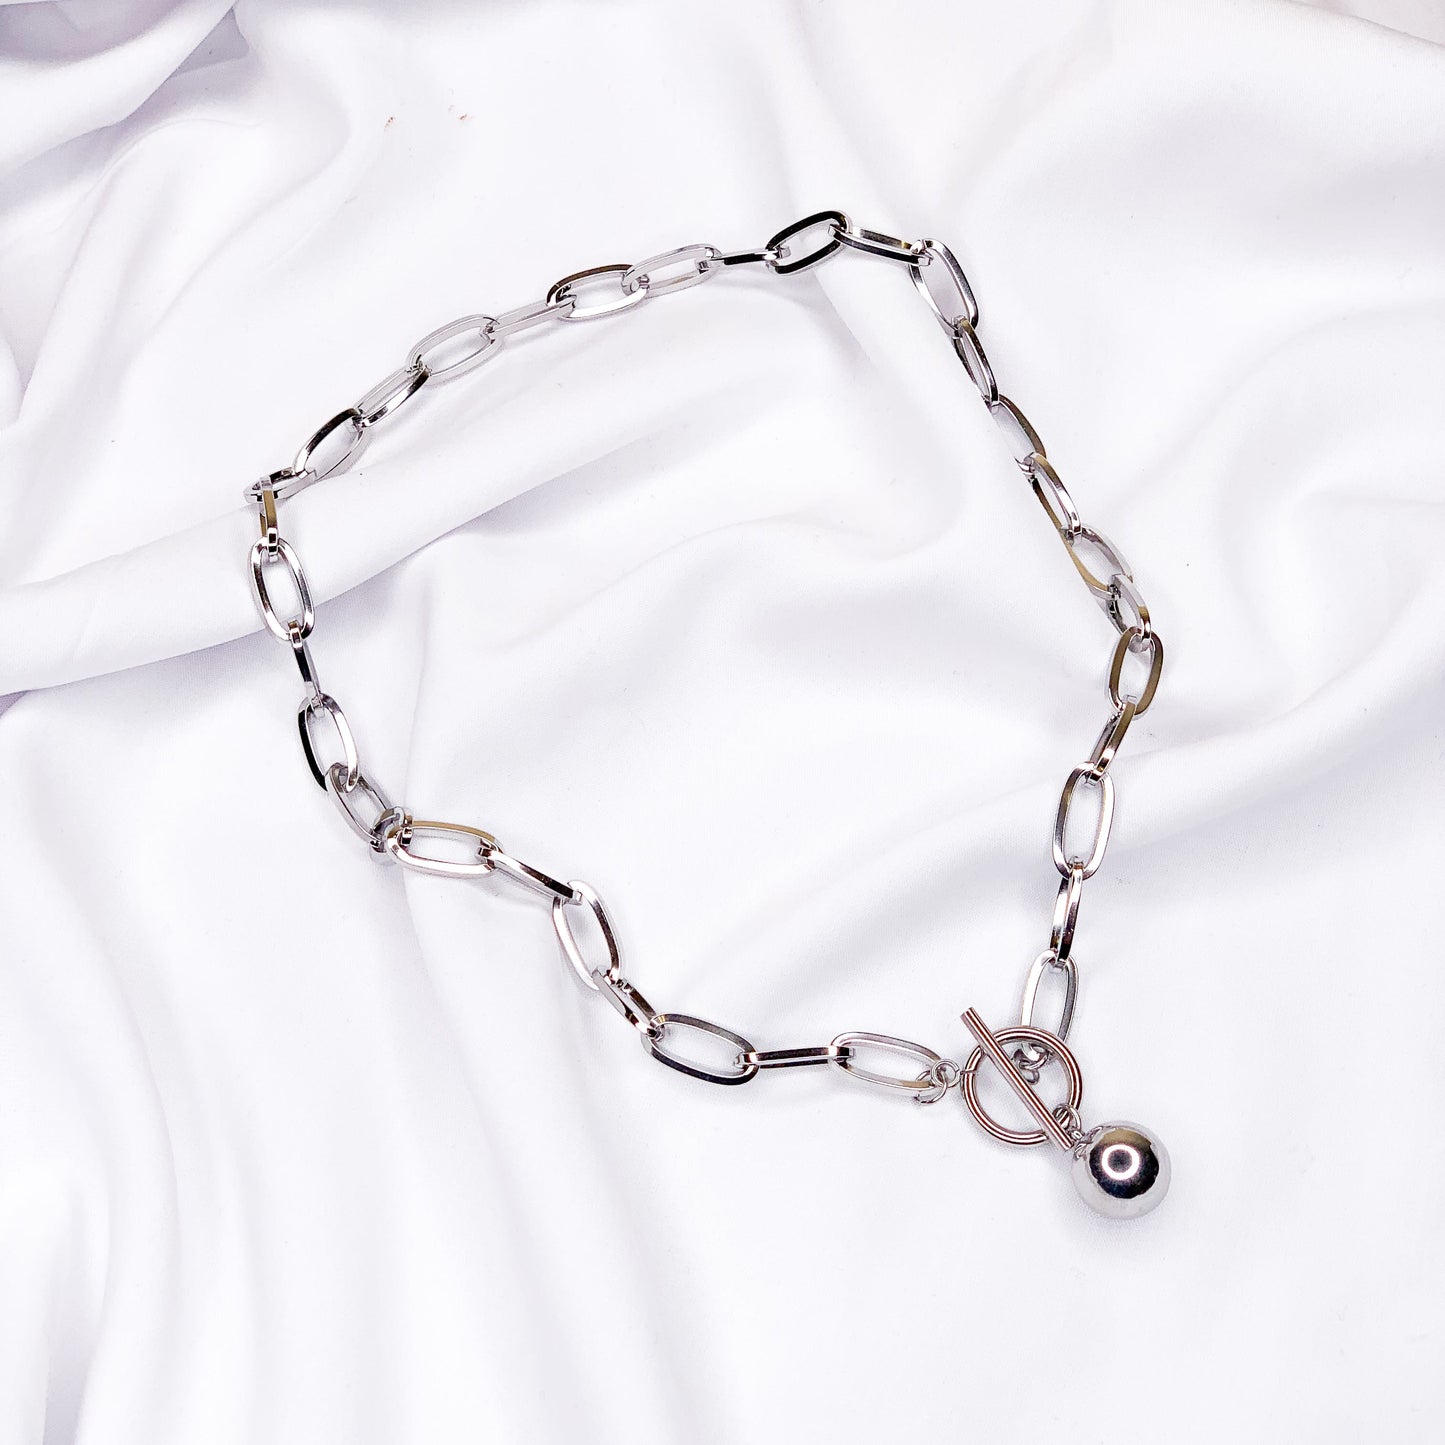 Hellen.V - Silver Chain Necklace with Ball Pendant